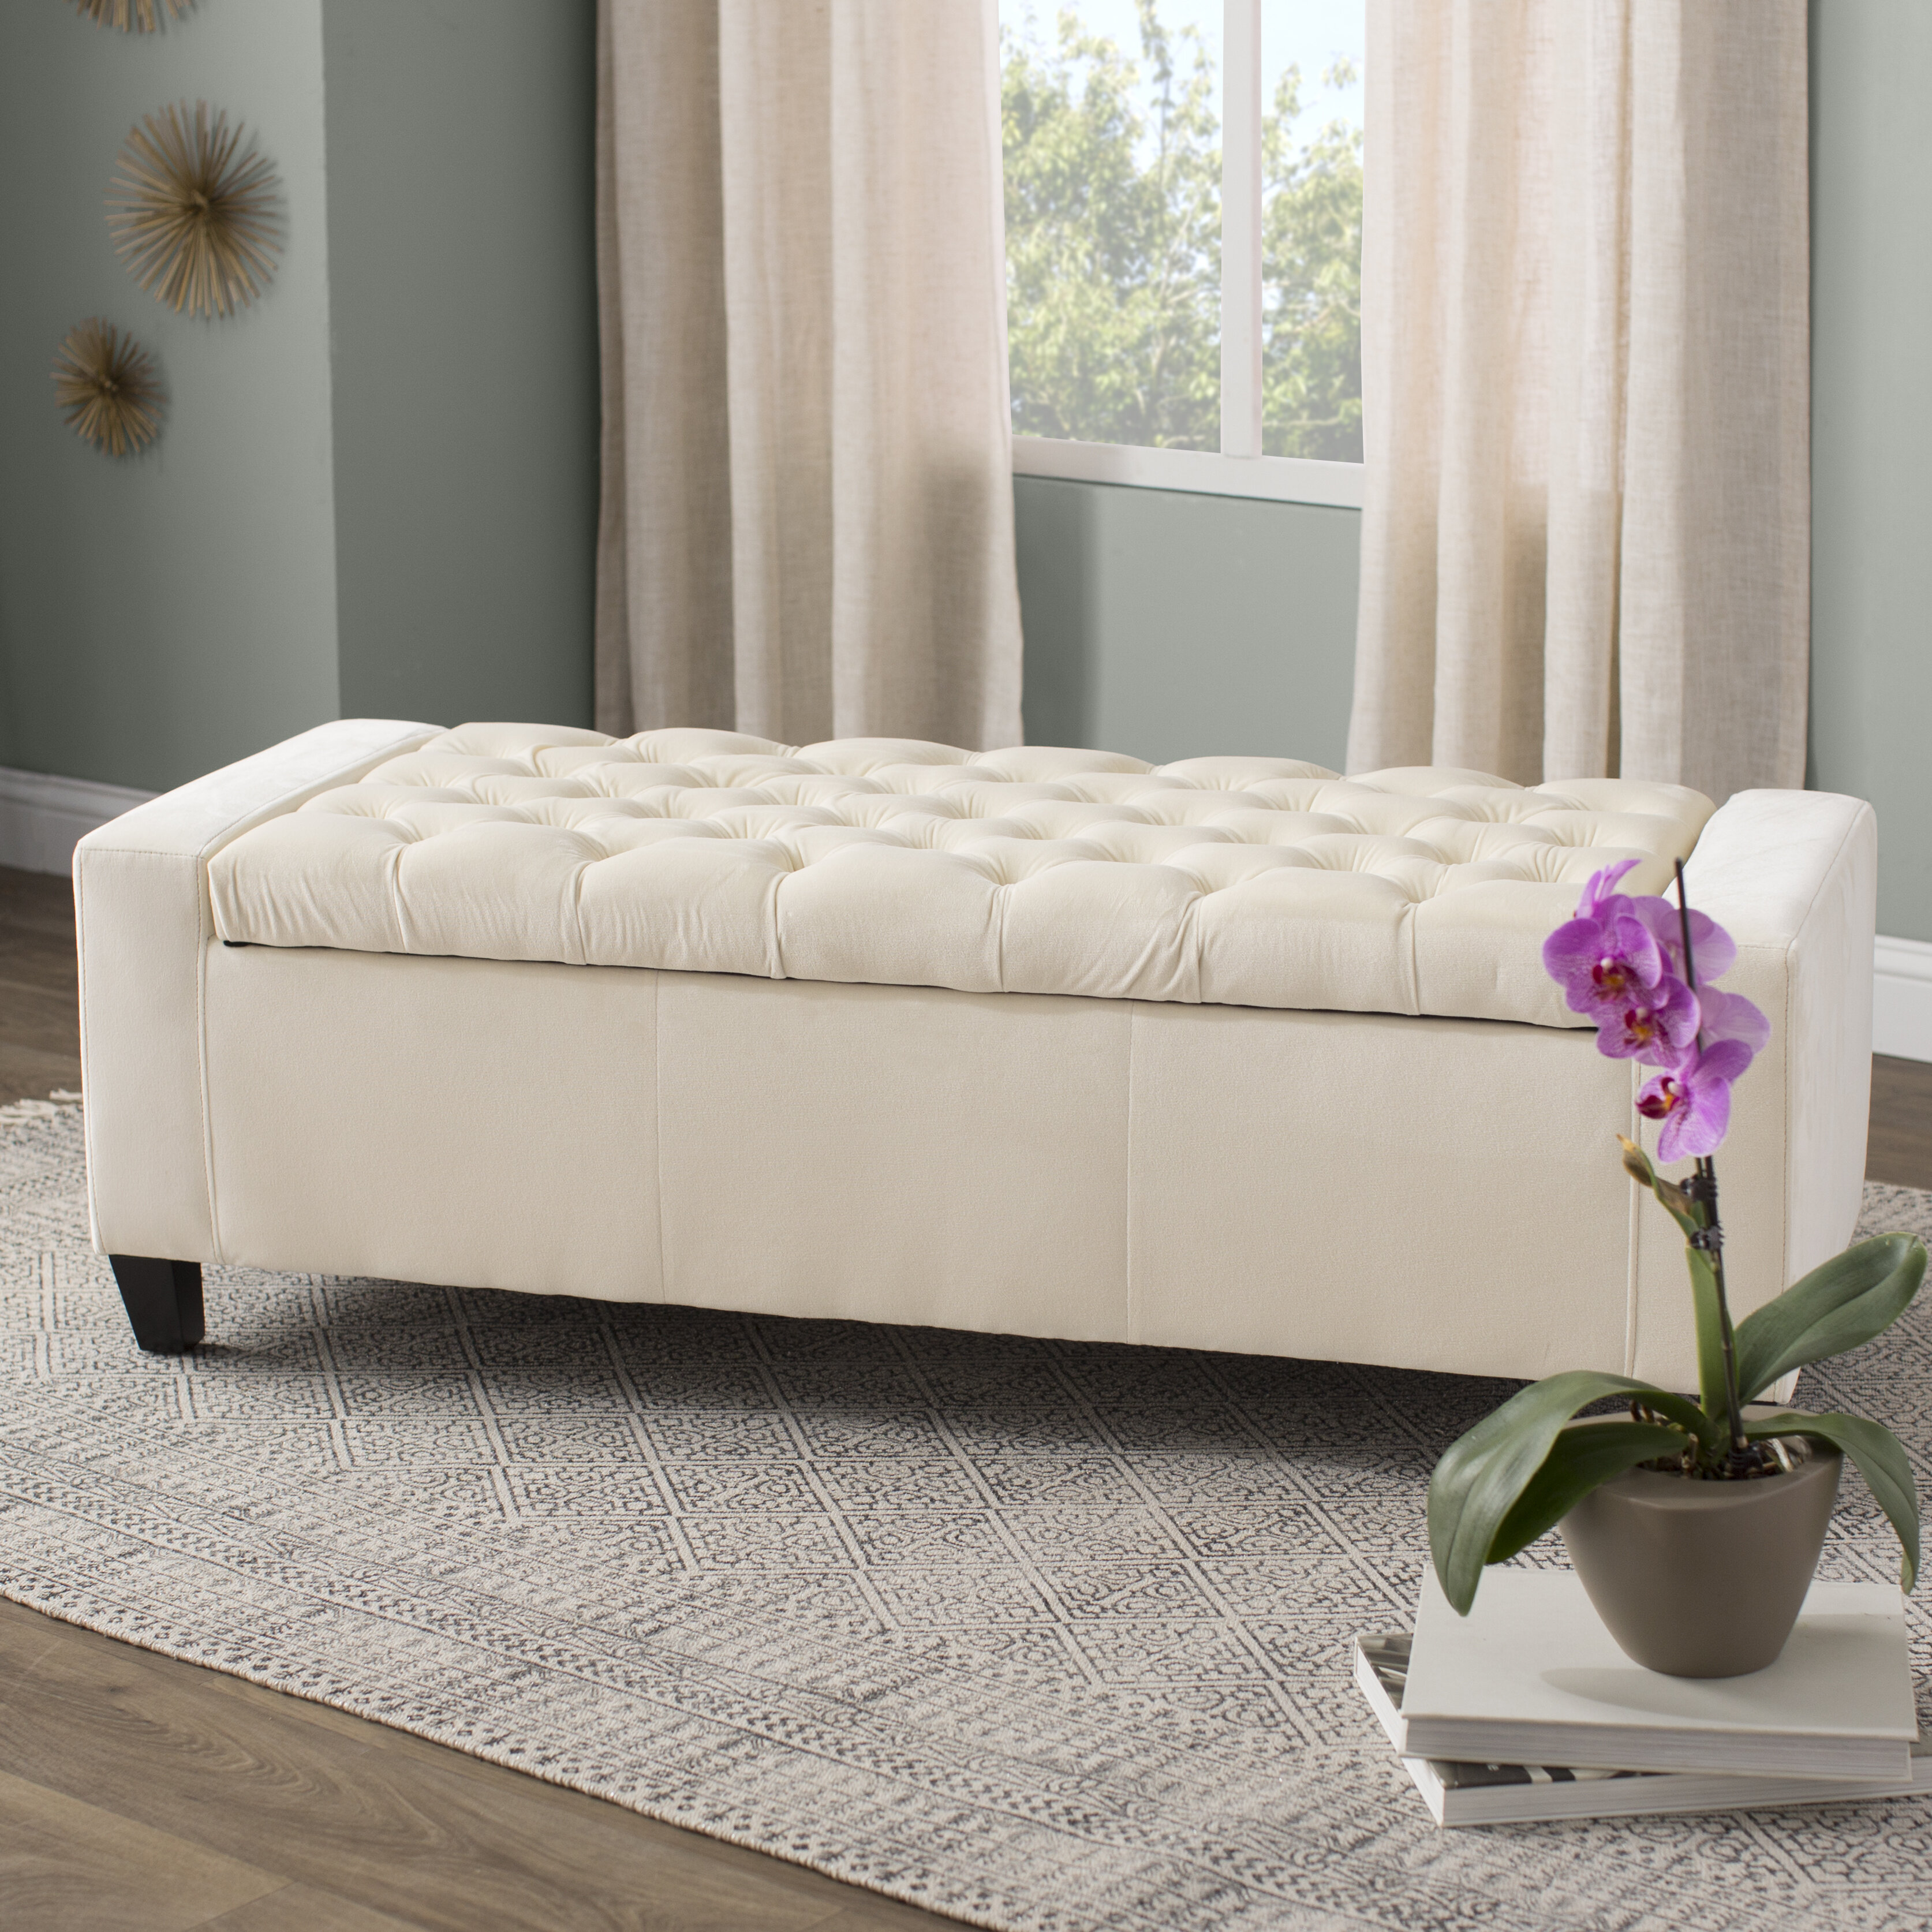 House Of Hampton Ilchester Upholstered Flip Top Storage Bench Reviews Wayfairca